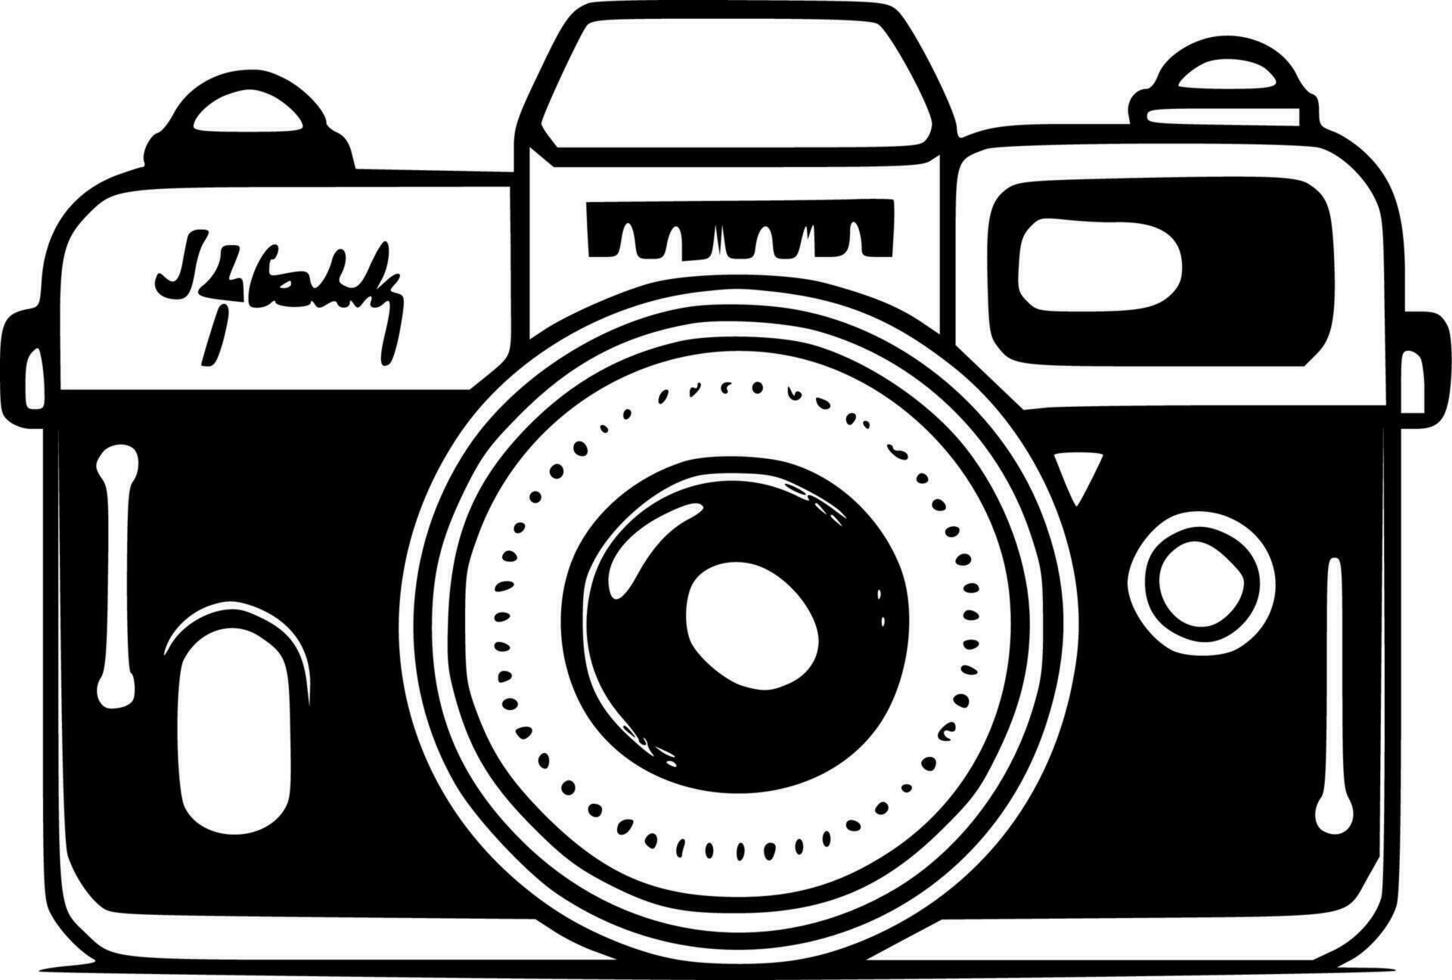 Camera - High Quality Vector Logo - Vector illustration ideal for T-shirt graphic